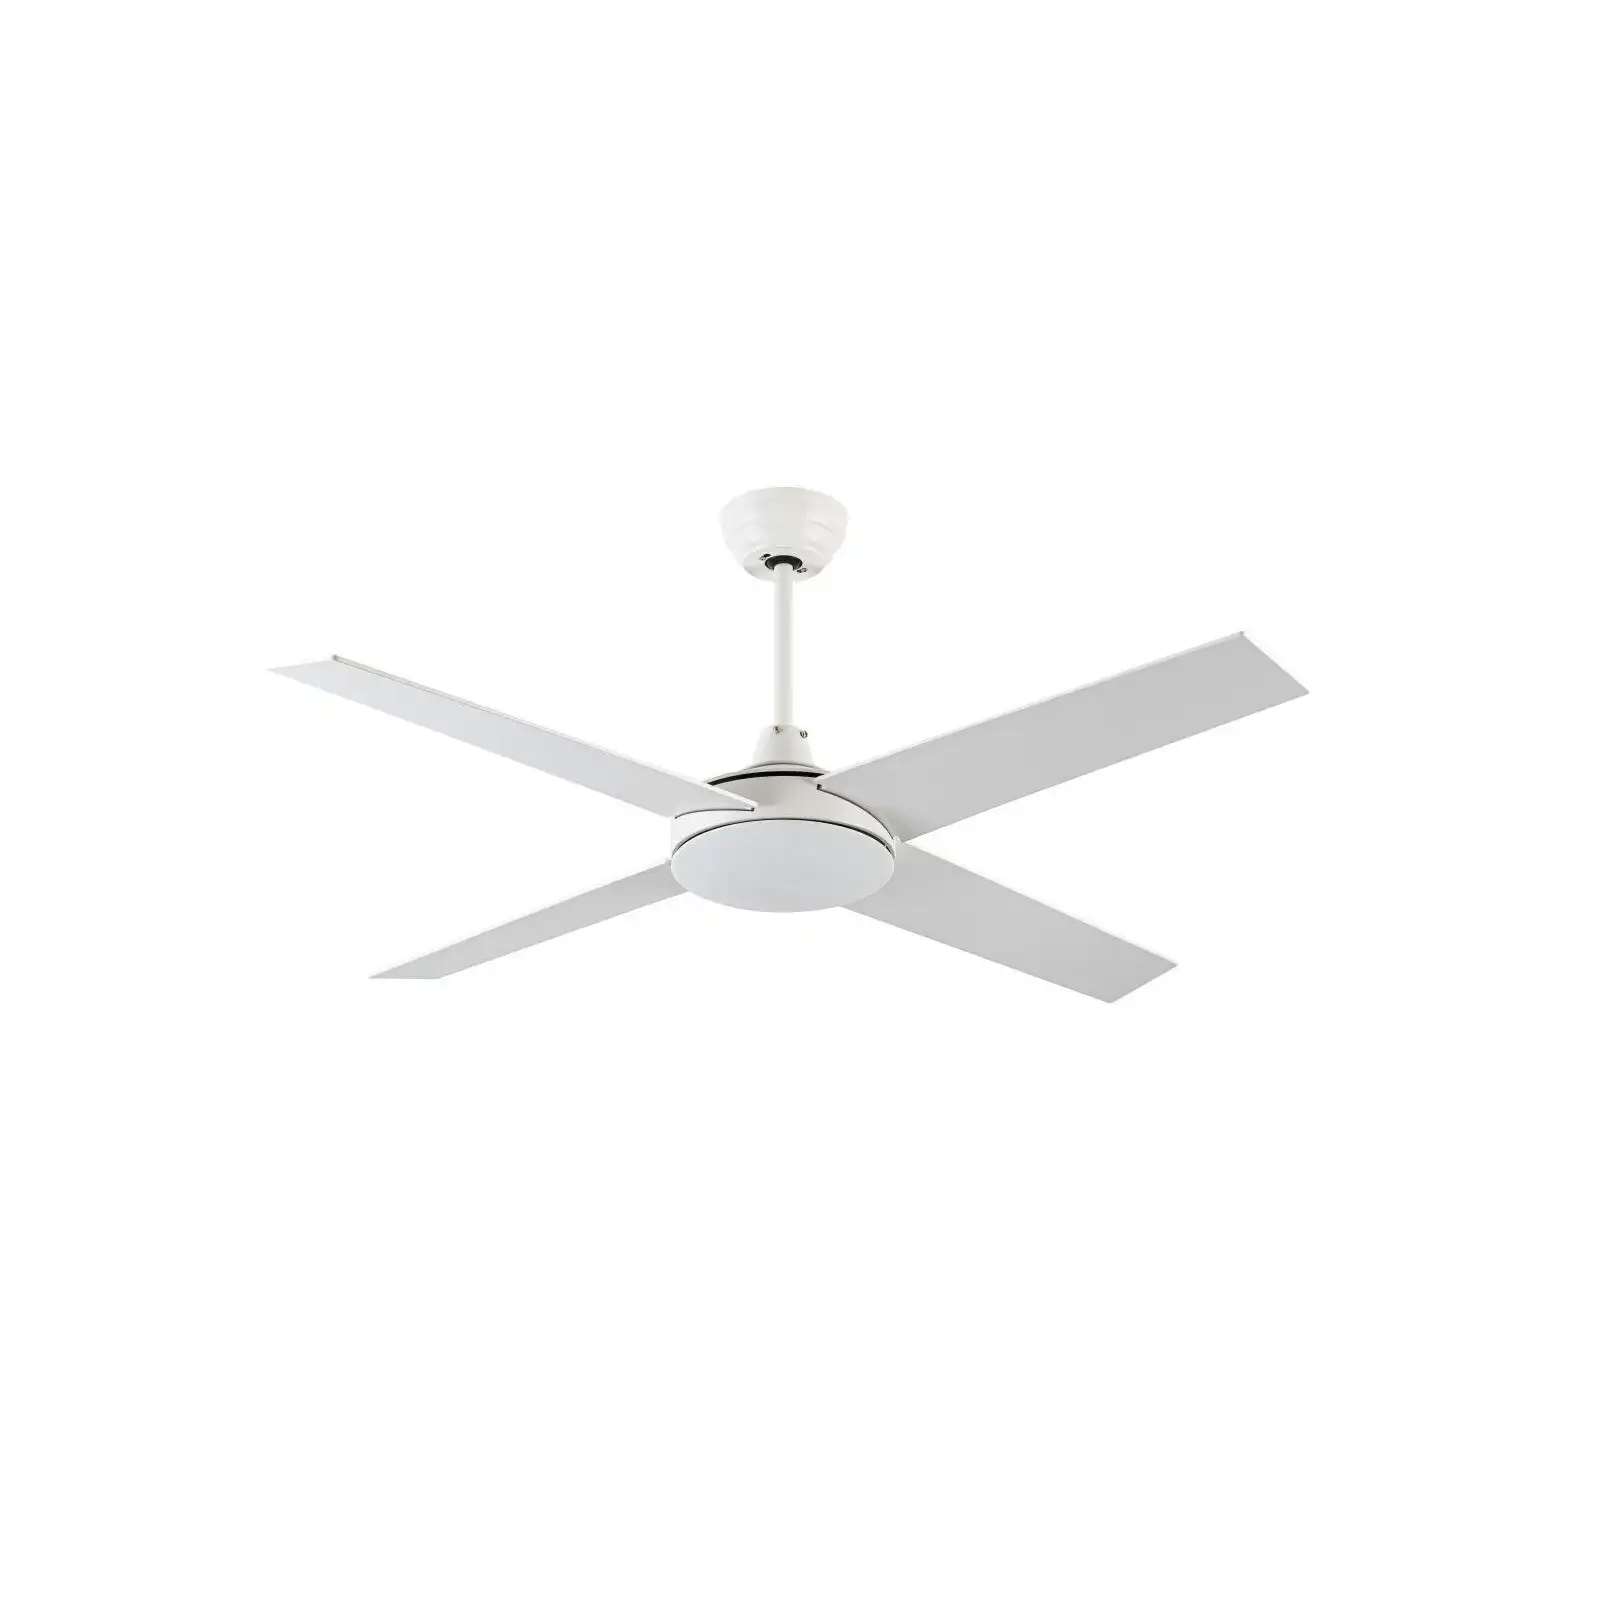 Viviendo 52 Inch 4 Blade Ceiling Fan with 3 Speed Remote Control - White